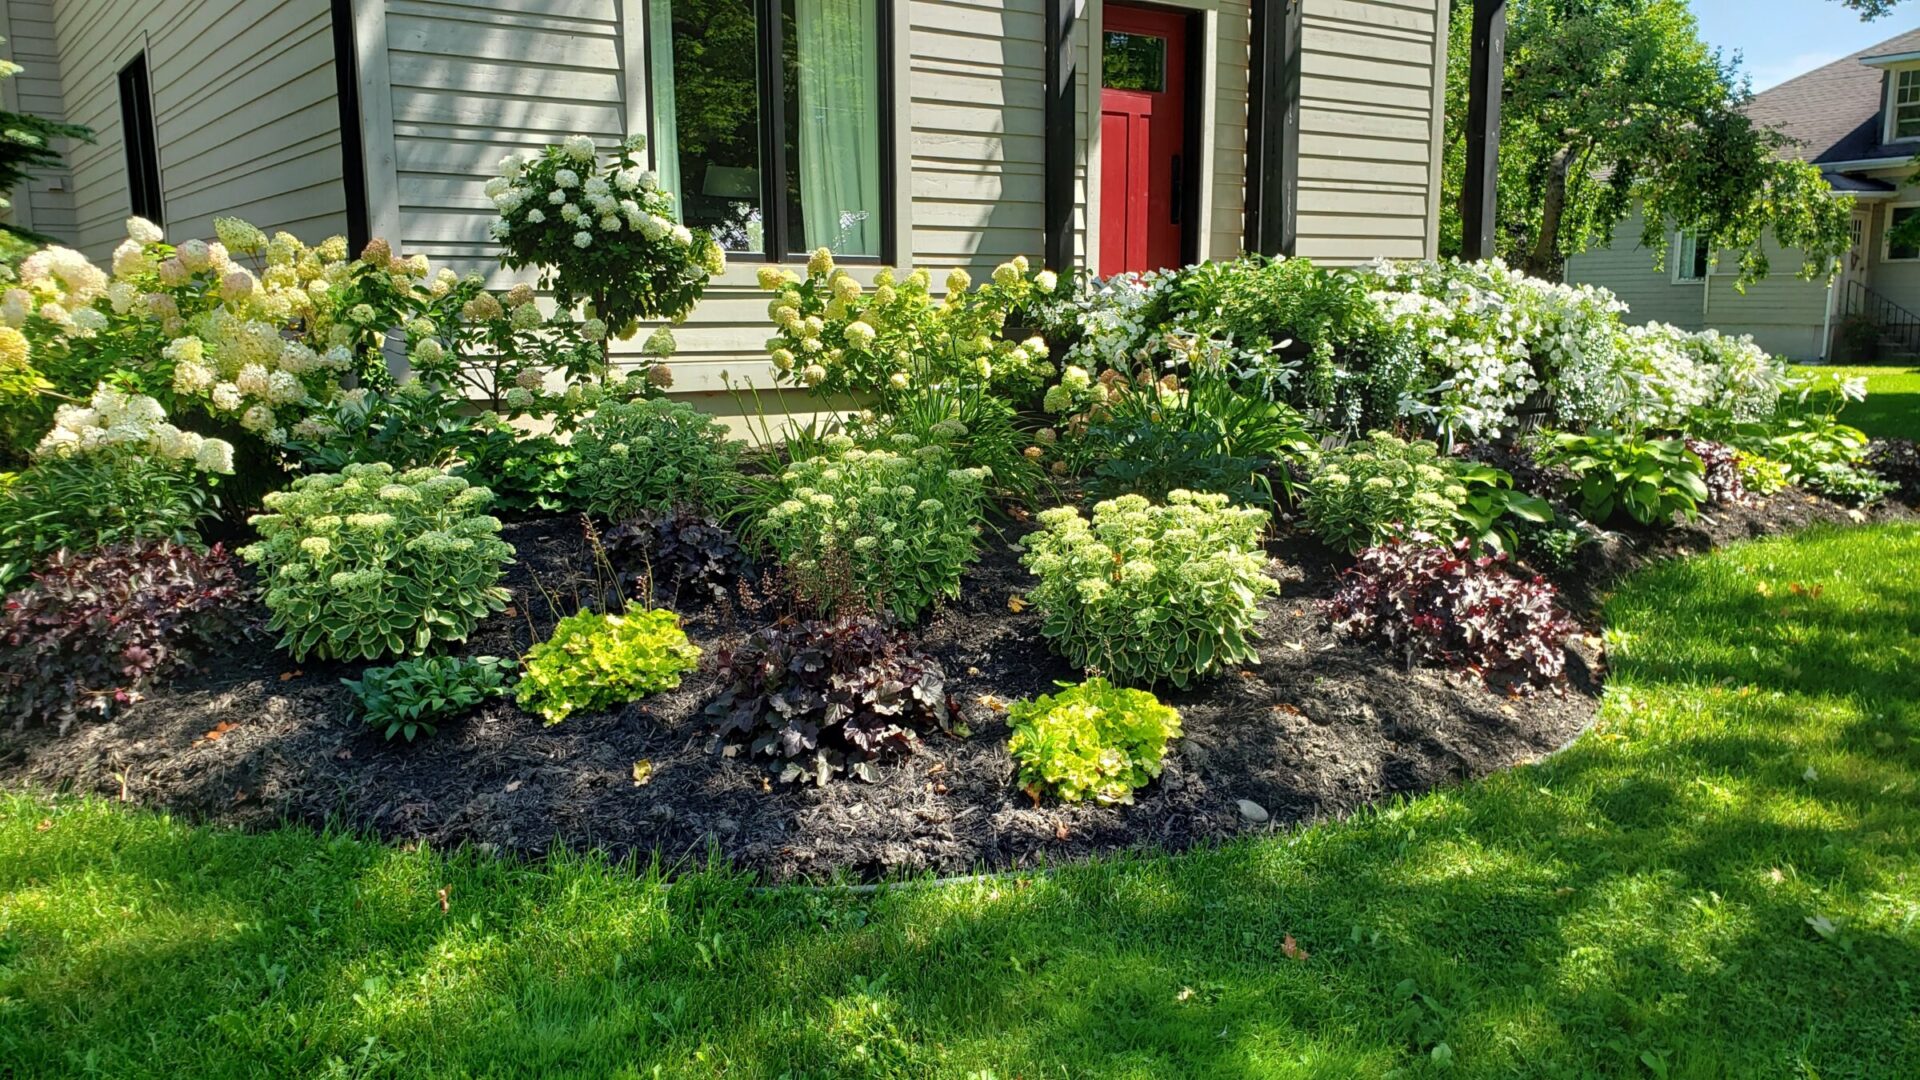 A well-maintained garden with lush hydrangeas, assorted plants, a red door, and beige siding on a sunny day, exemplifying suburban outdoor landscaping.